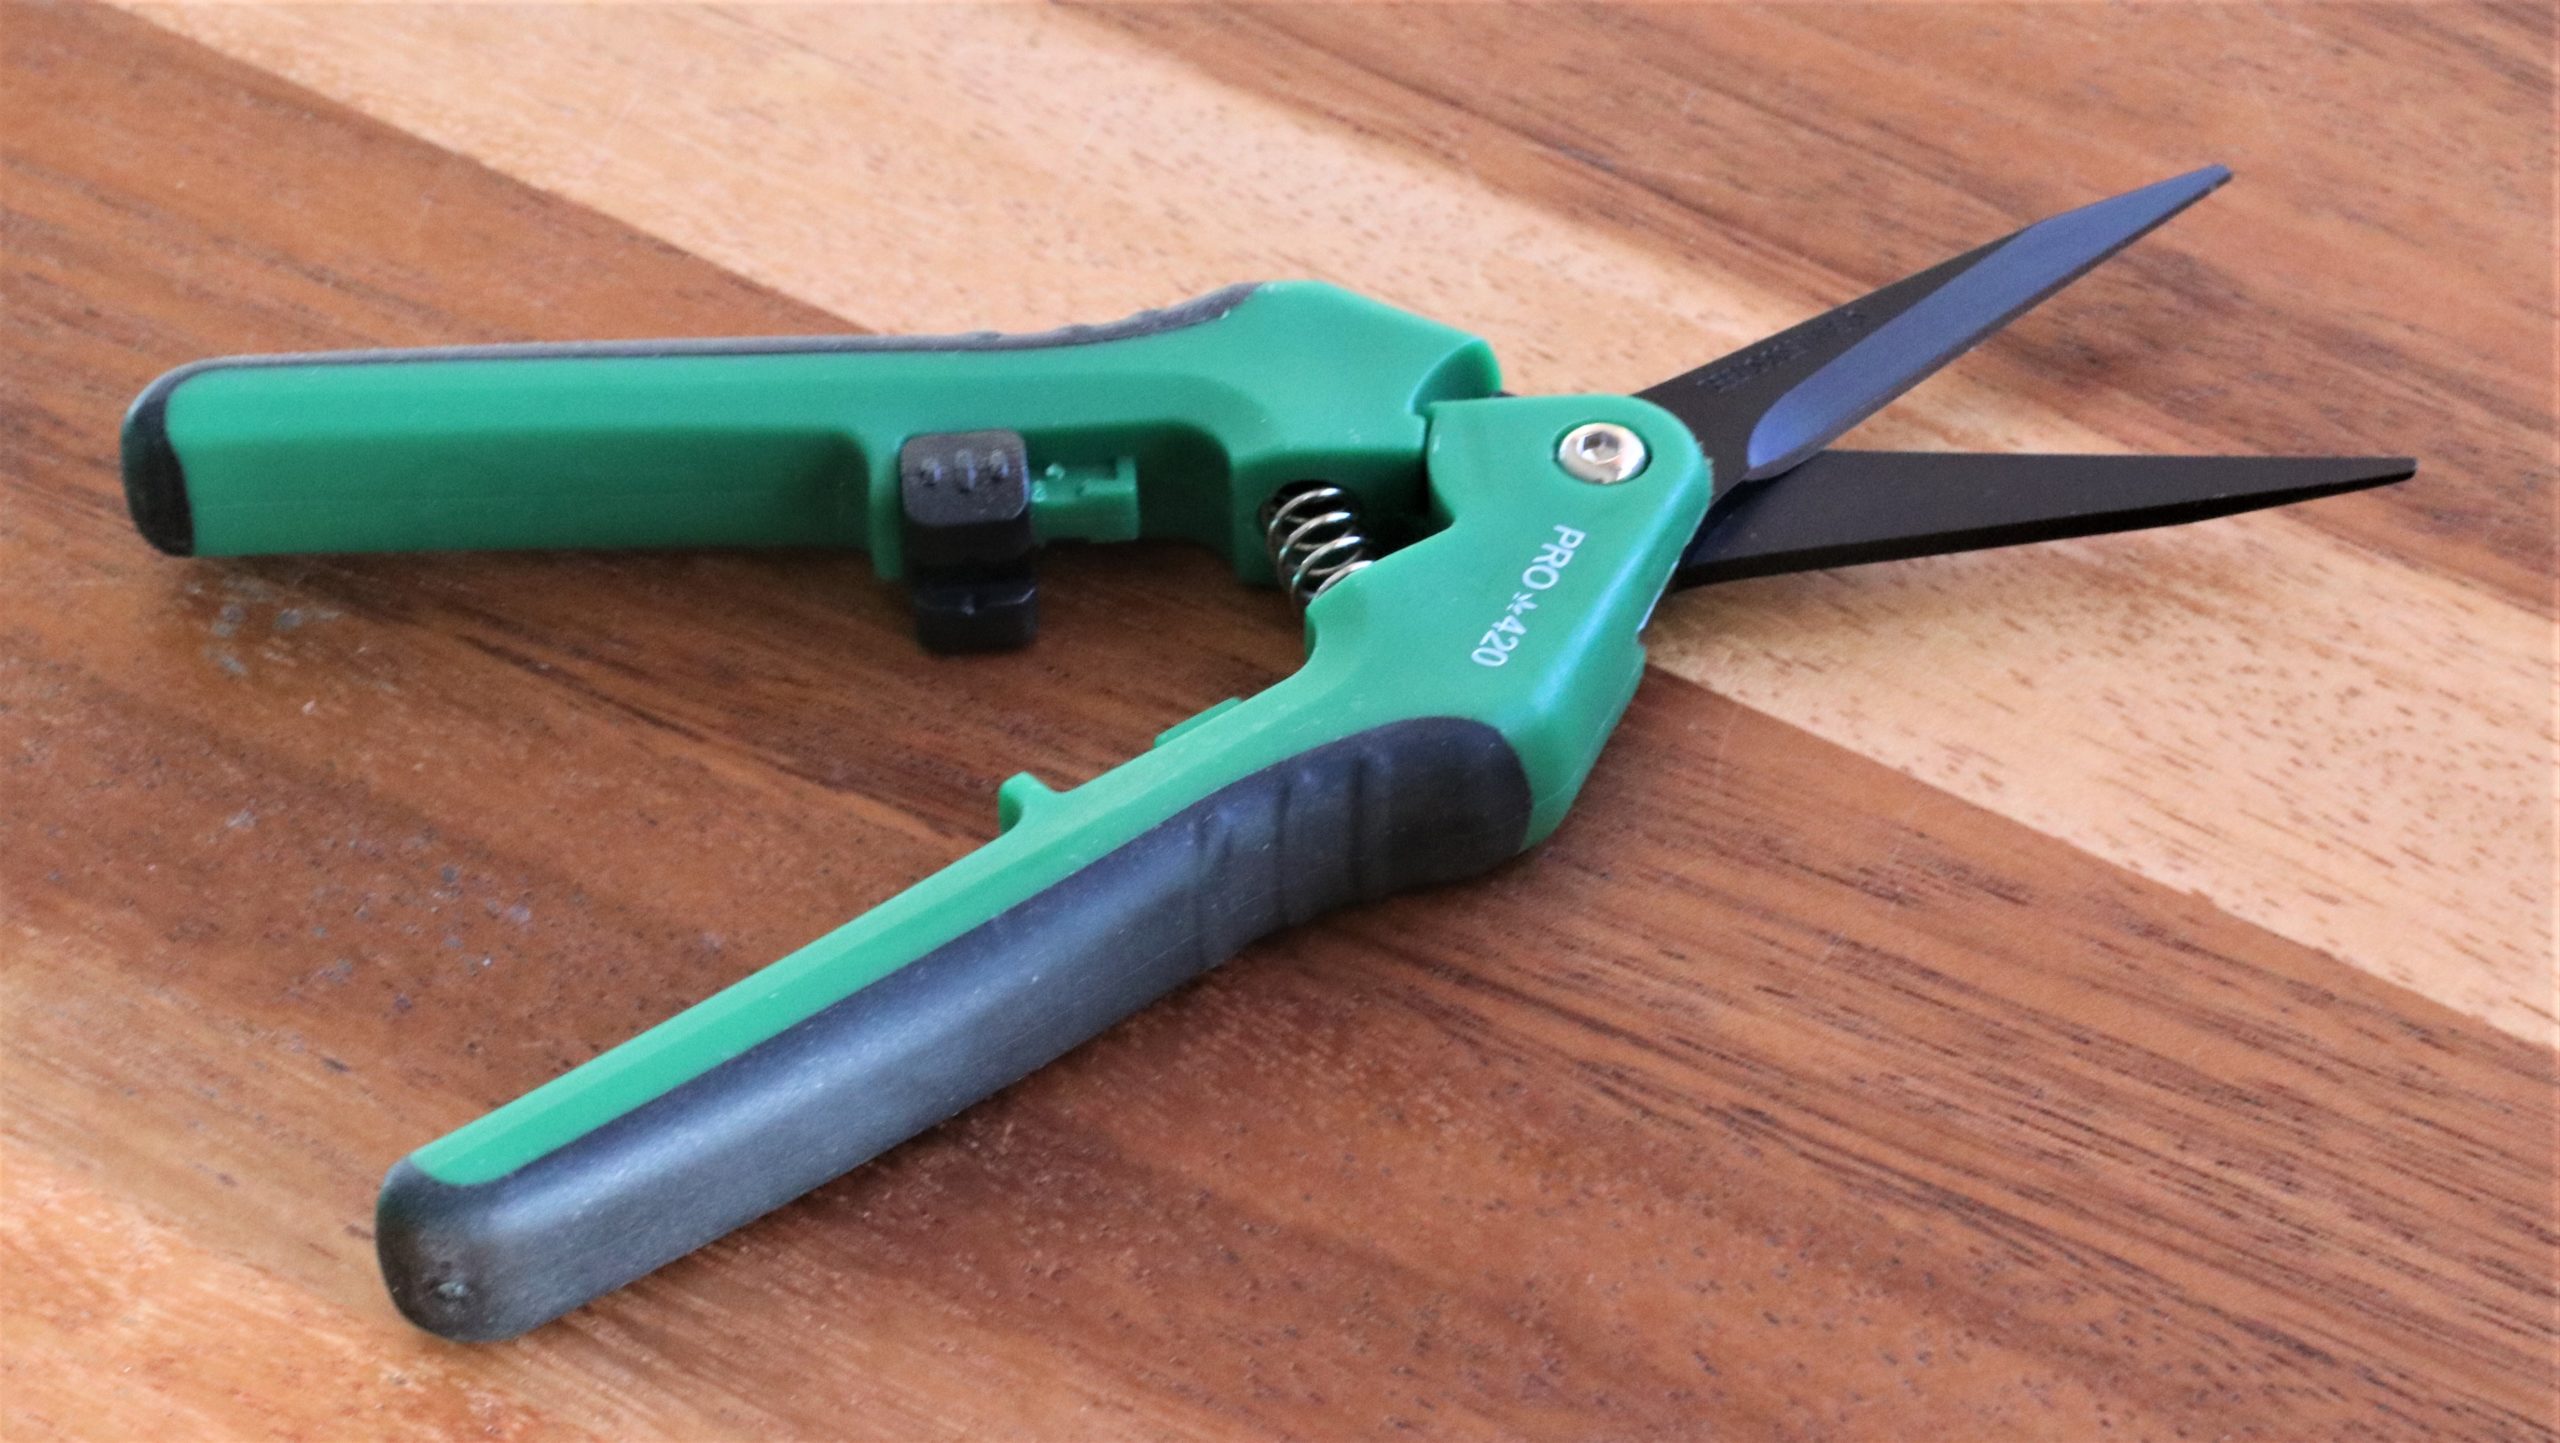 Bud Clean trimming scissors for sale